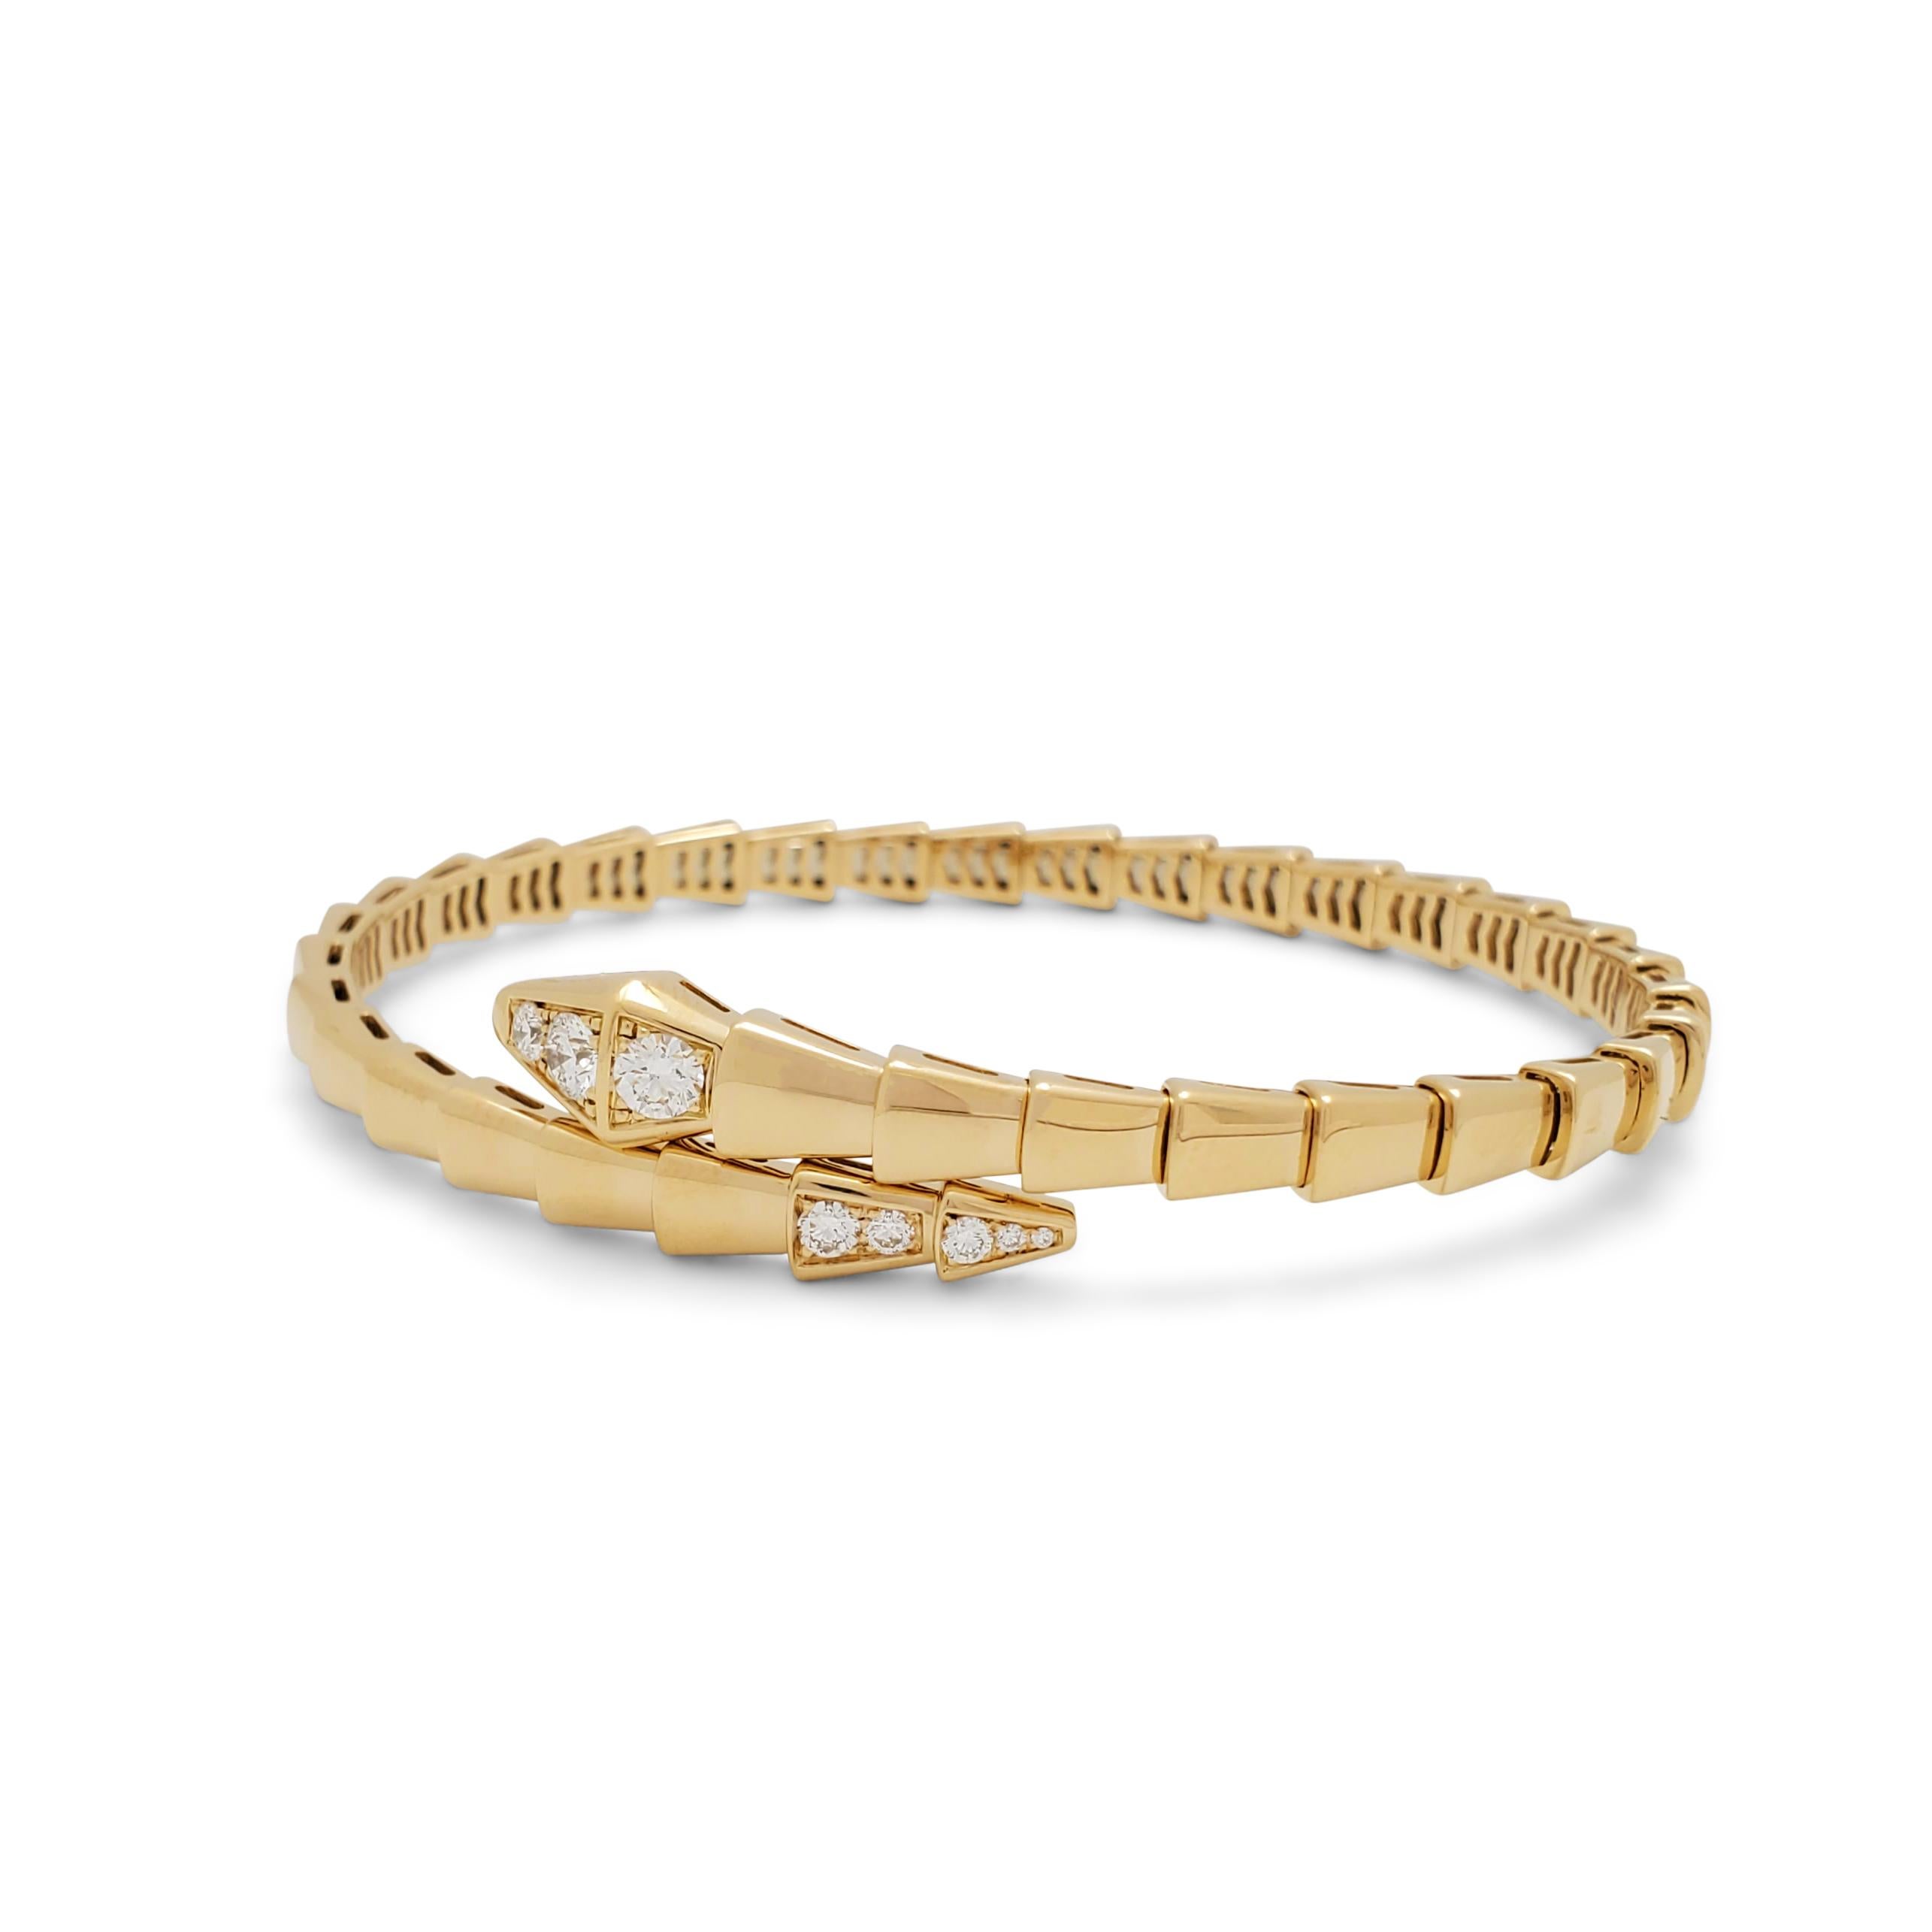 Authentic Bvlgari Serpenti Viper bracelet crafted in 18 karat yellow gold.  The head and tail of the snake design are set with round diamonds of an estimated 0.47 carats total weight.  Size M (17 cm).  Signed Bvlgari, Au750, Made in Italy, with